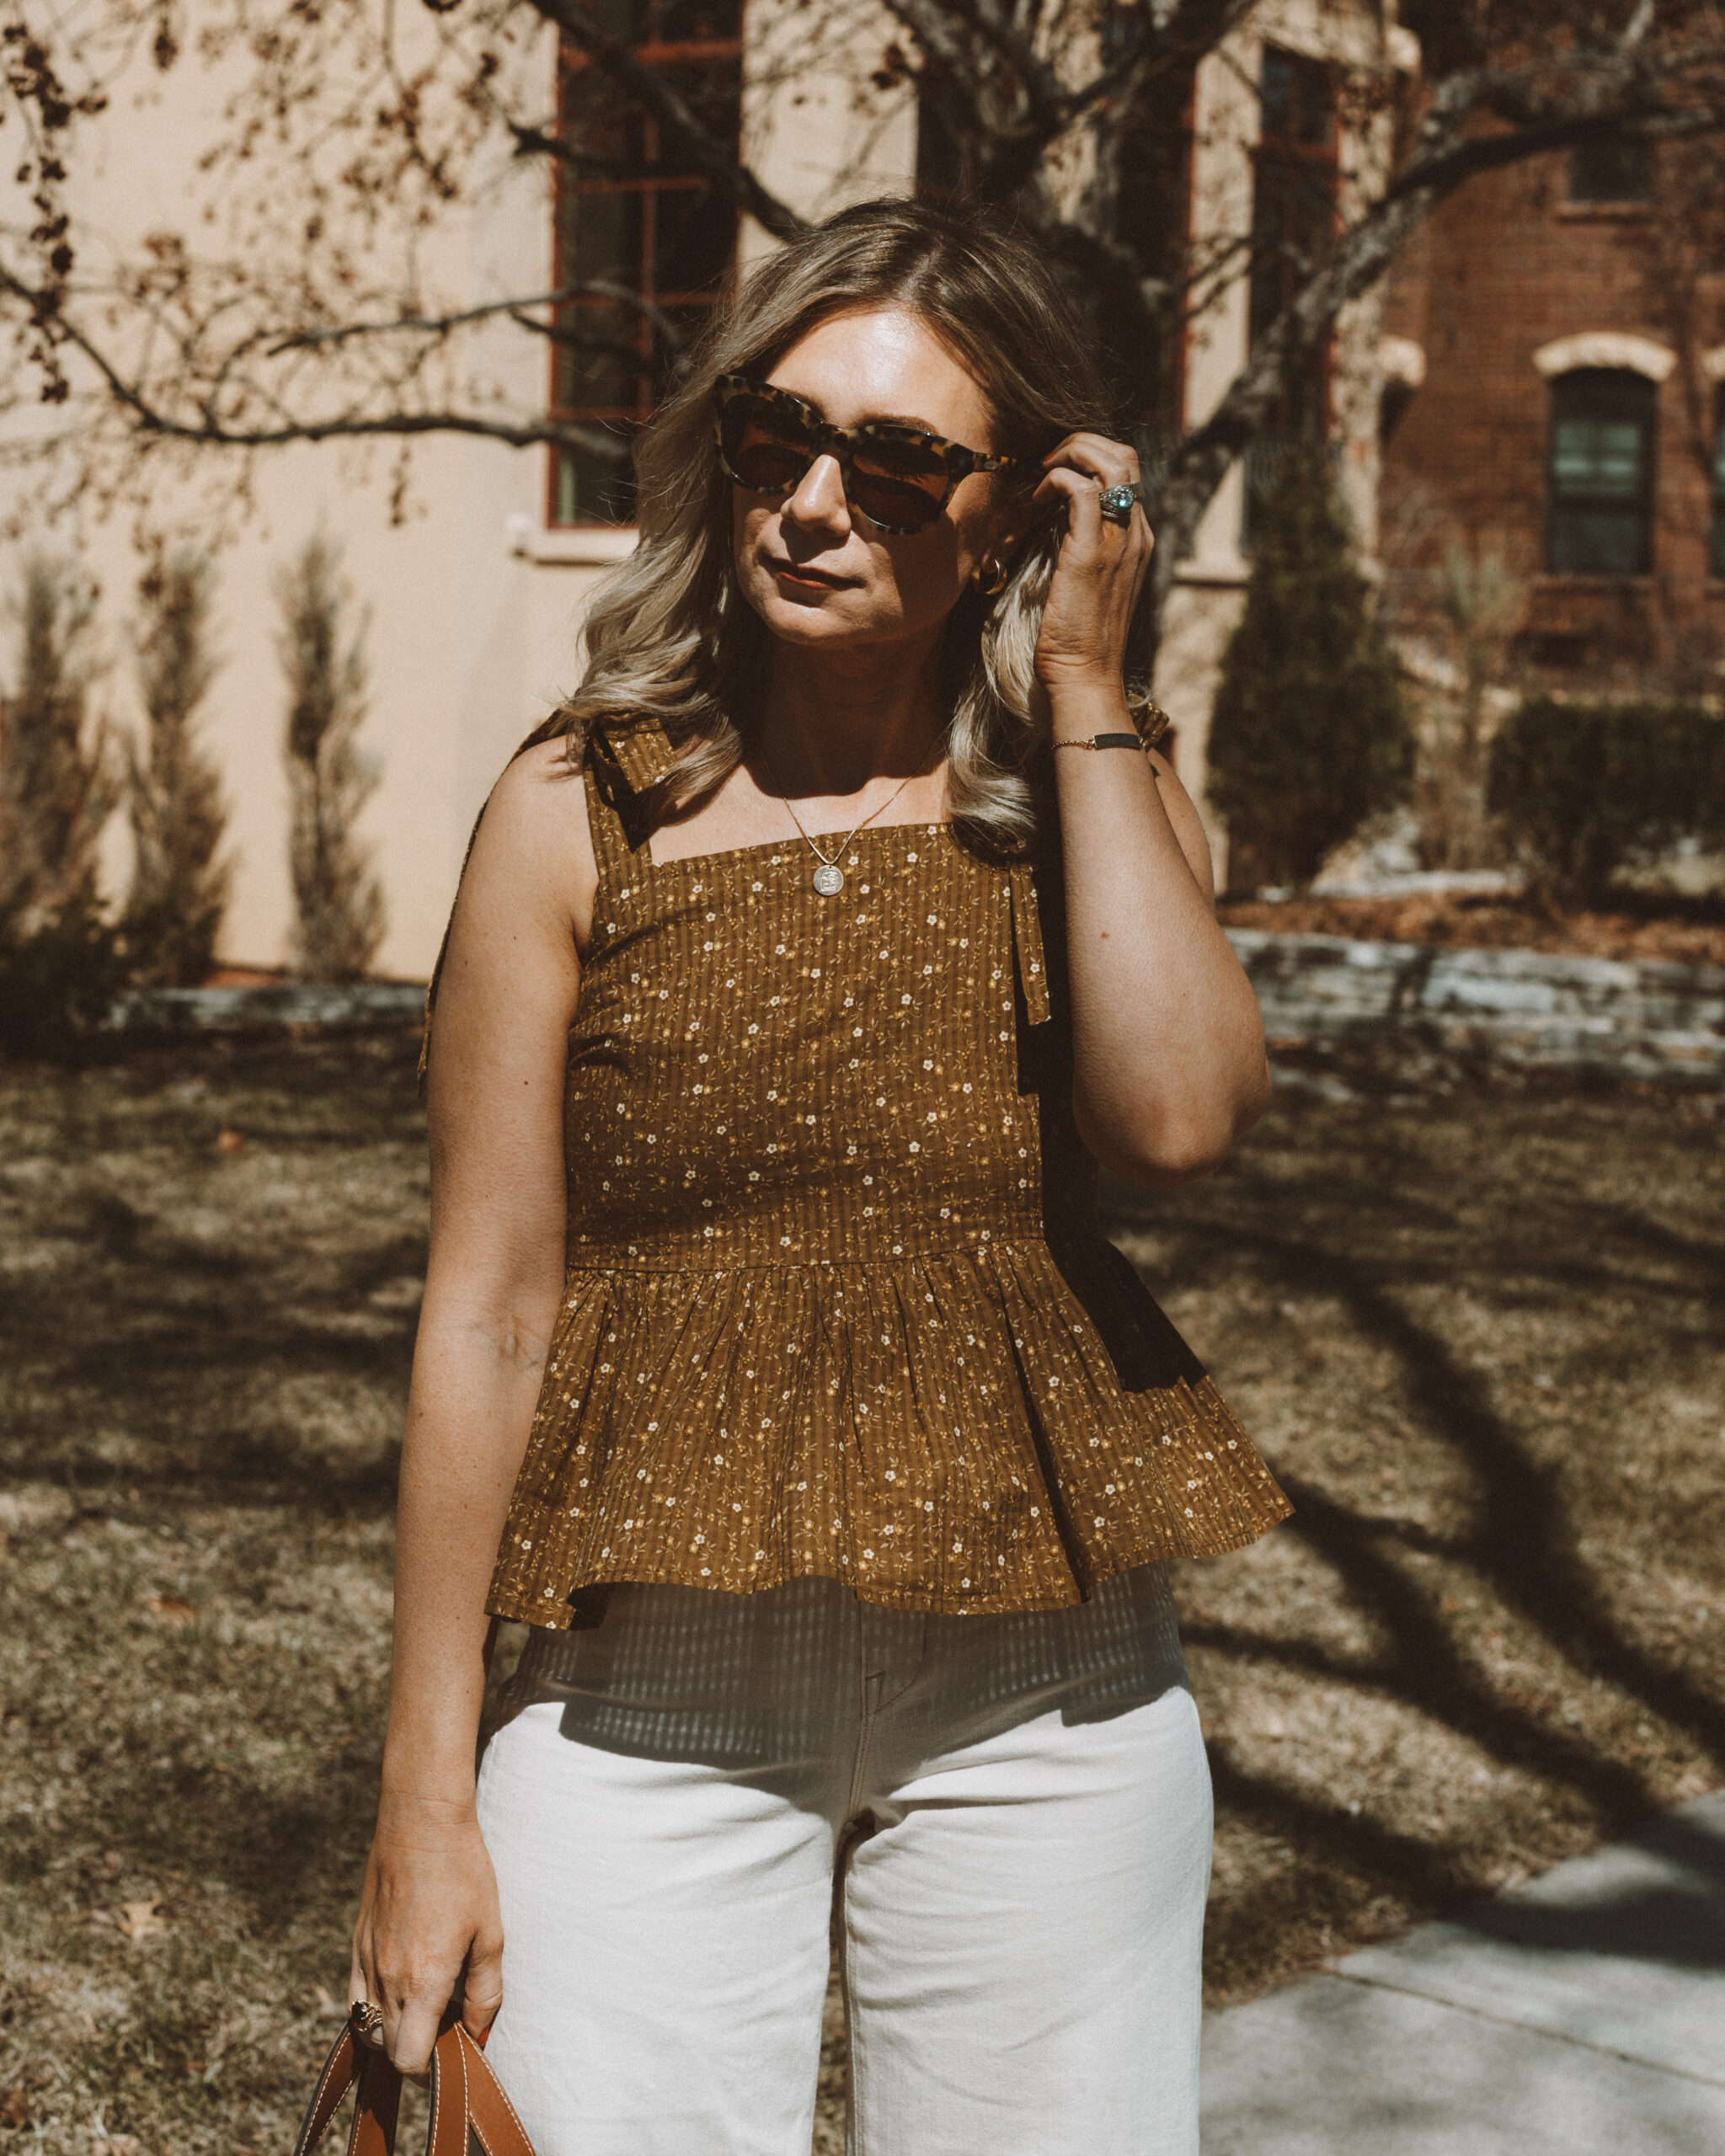 Karin Emily wears a peplum top from Madewell, J. Crew Cabana Sunglasses, and wide leg jeans from AYR